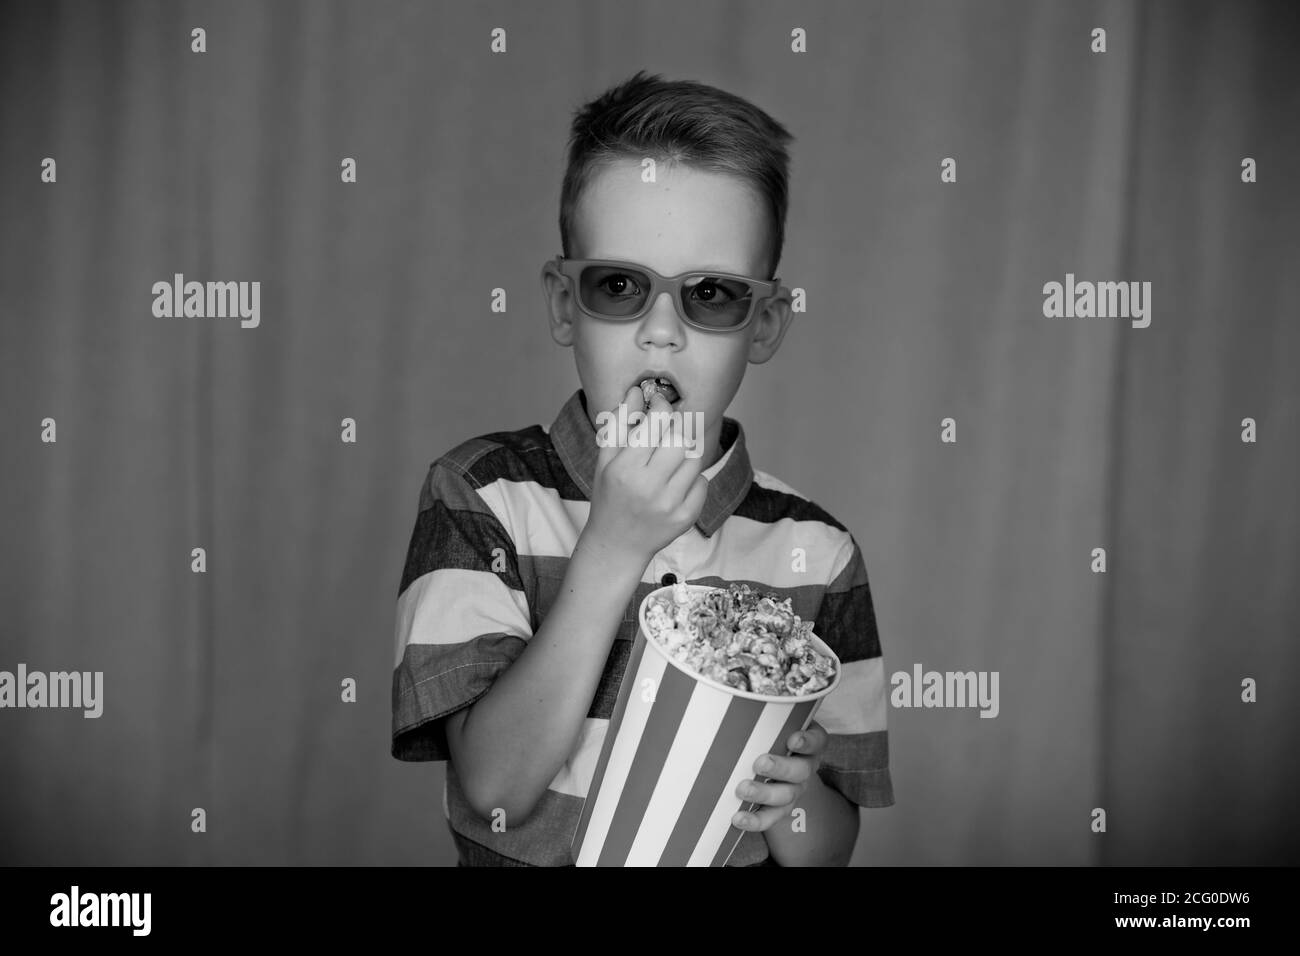 Home theater. Cute Child in vintage cinema eyeglasses. Entertainment concept. Vintage Black and white photography Stock Photo